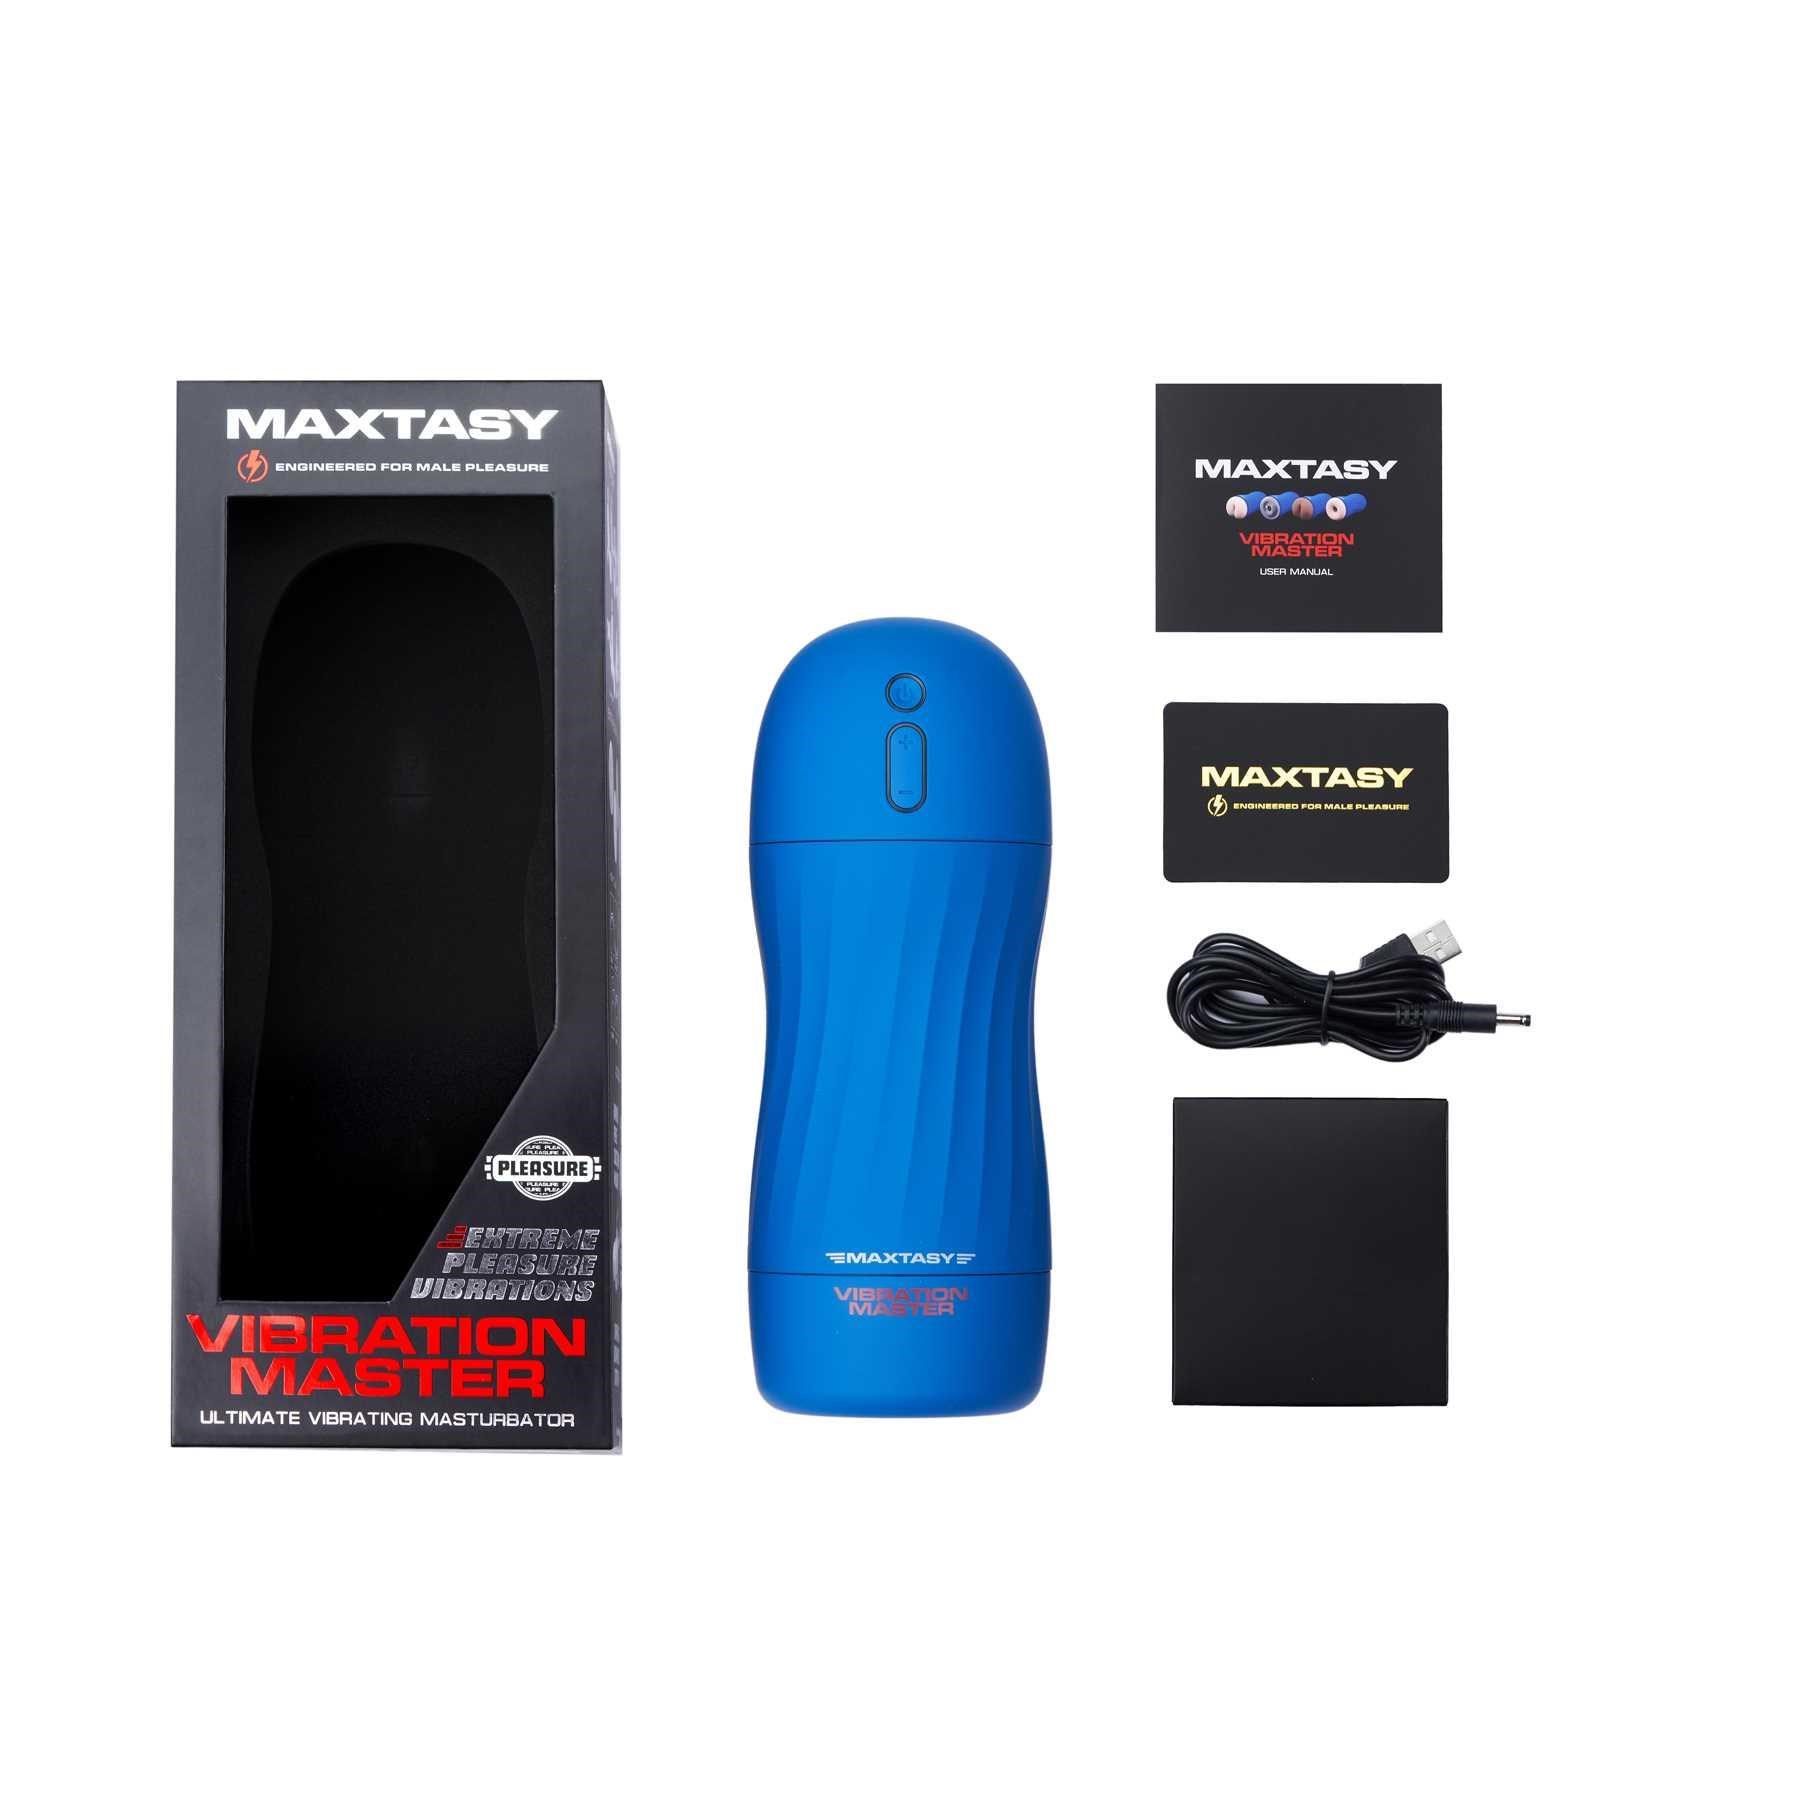 Maxtasy Vibration Master Stroker with accessories and box